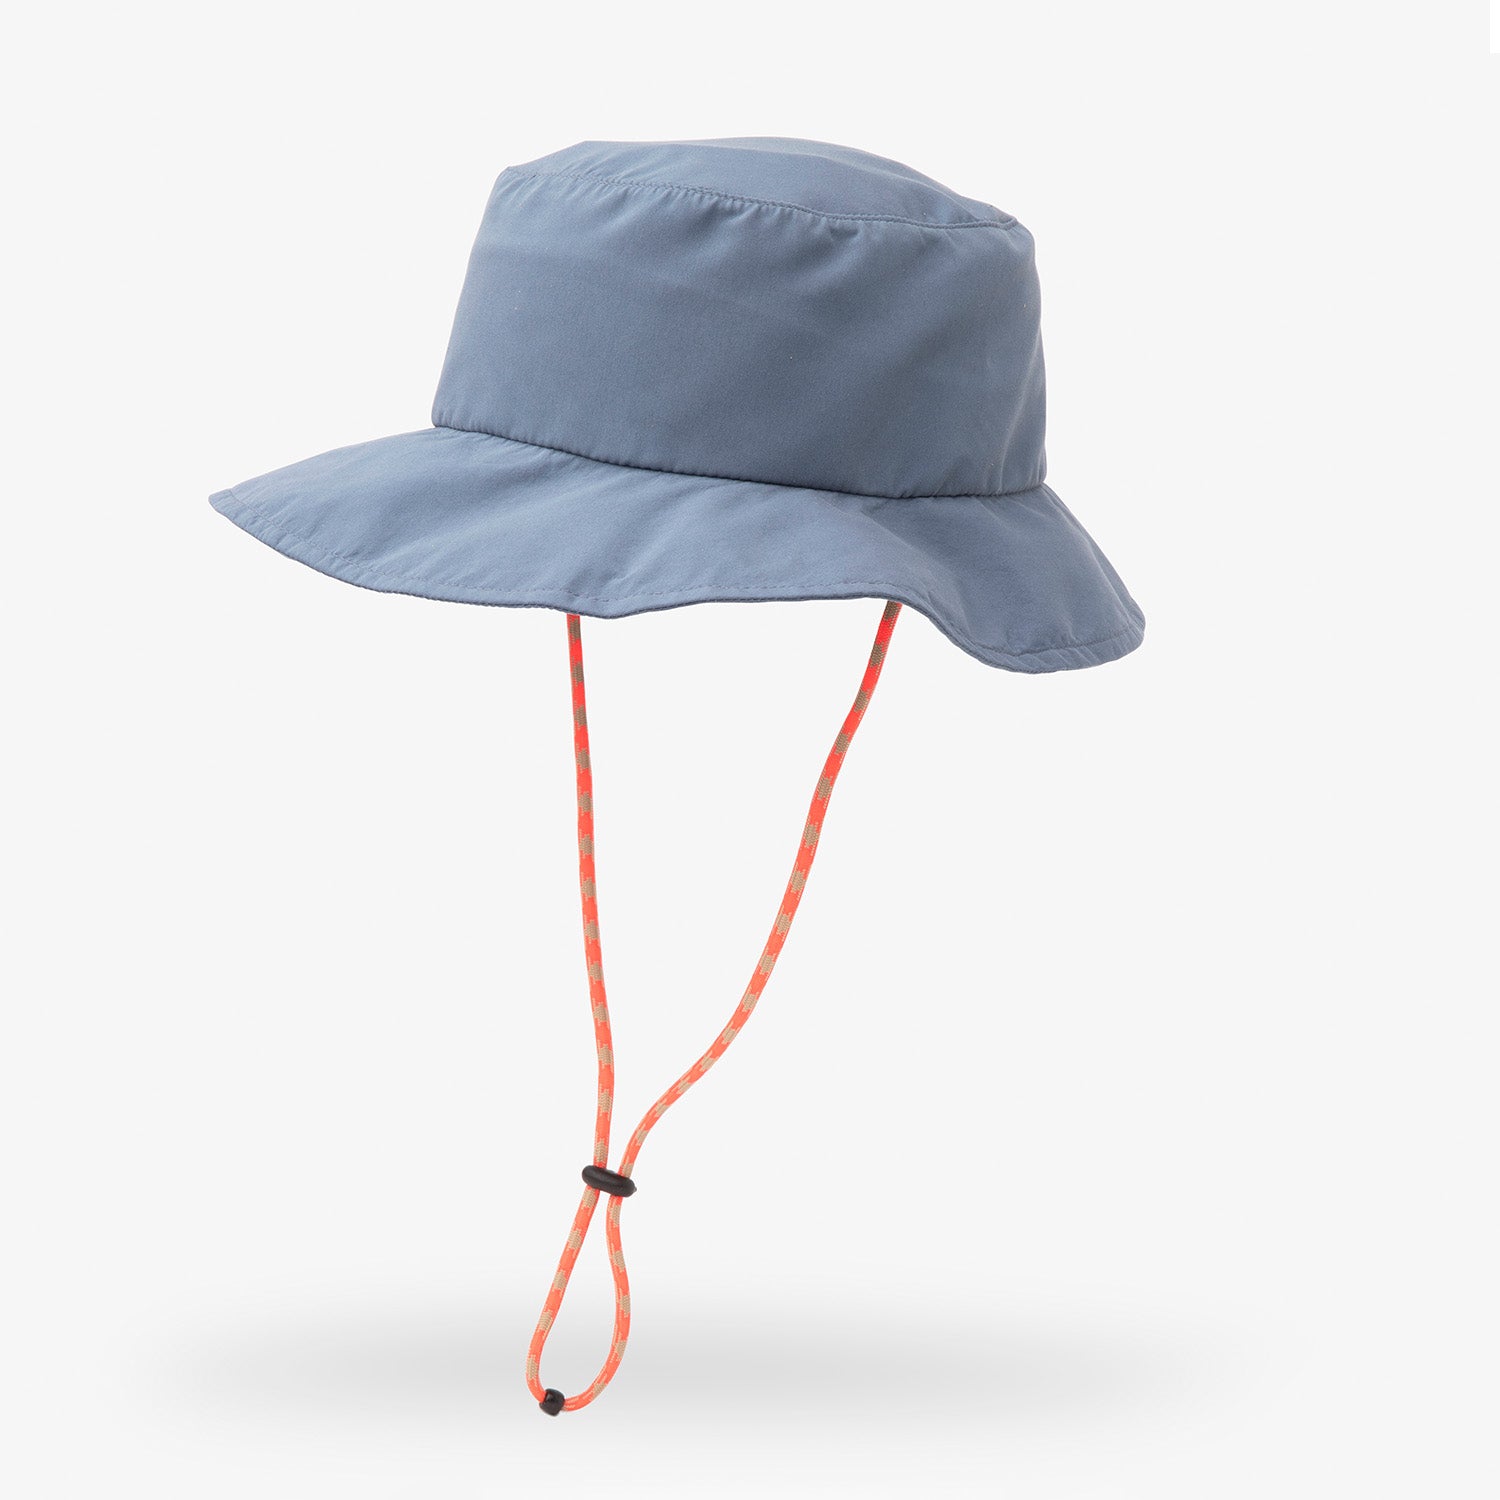 Cooling Bucket Hat for Performance | MISSION